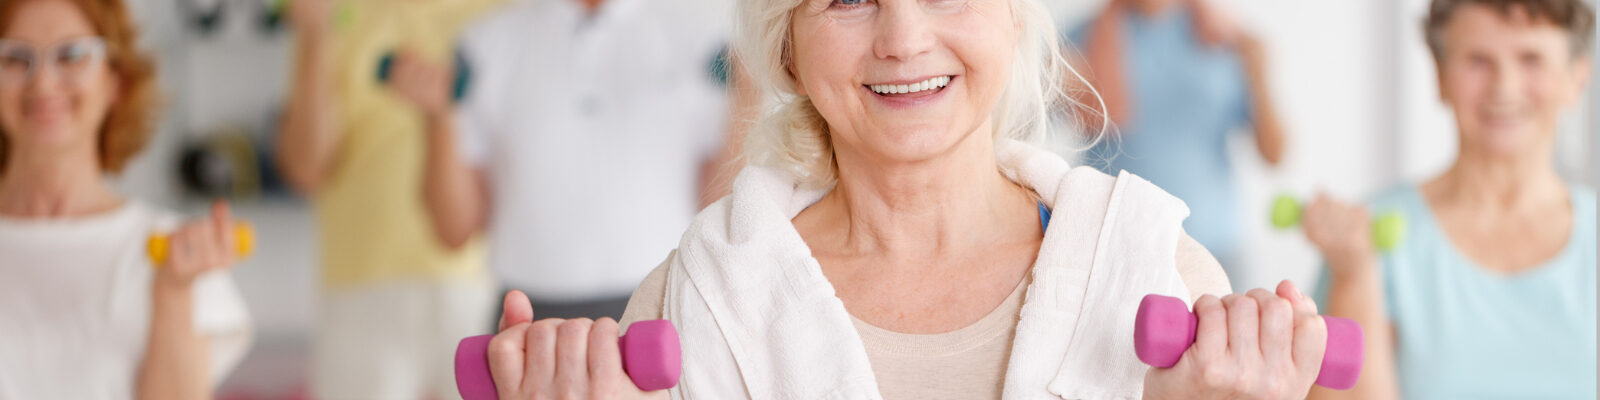 programs for seniors at the Y